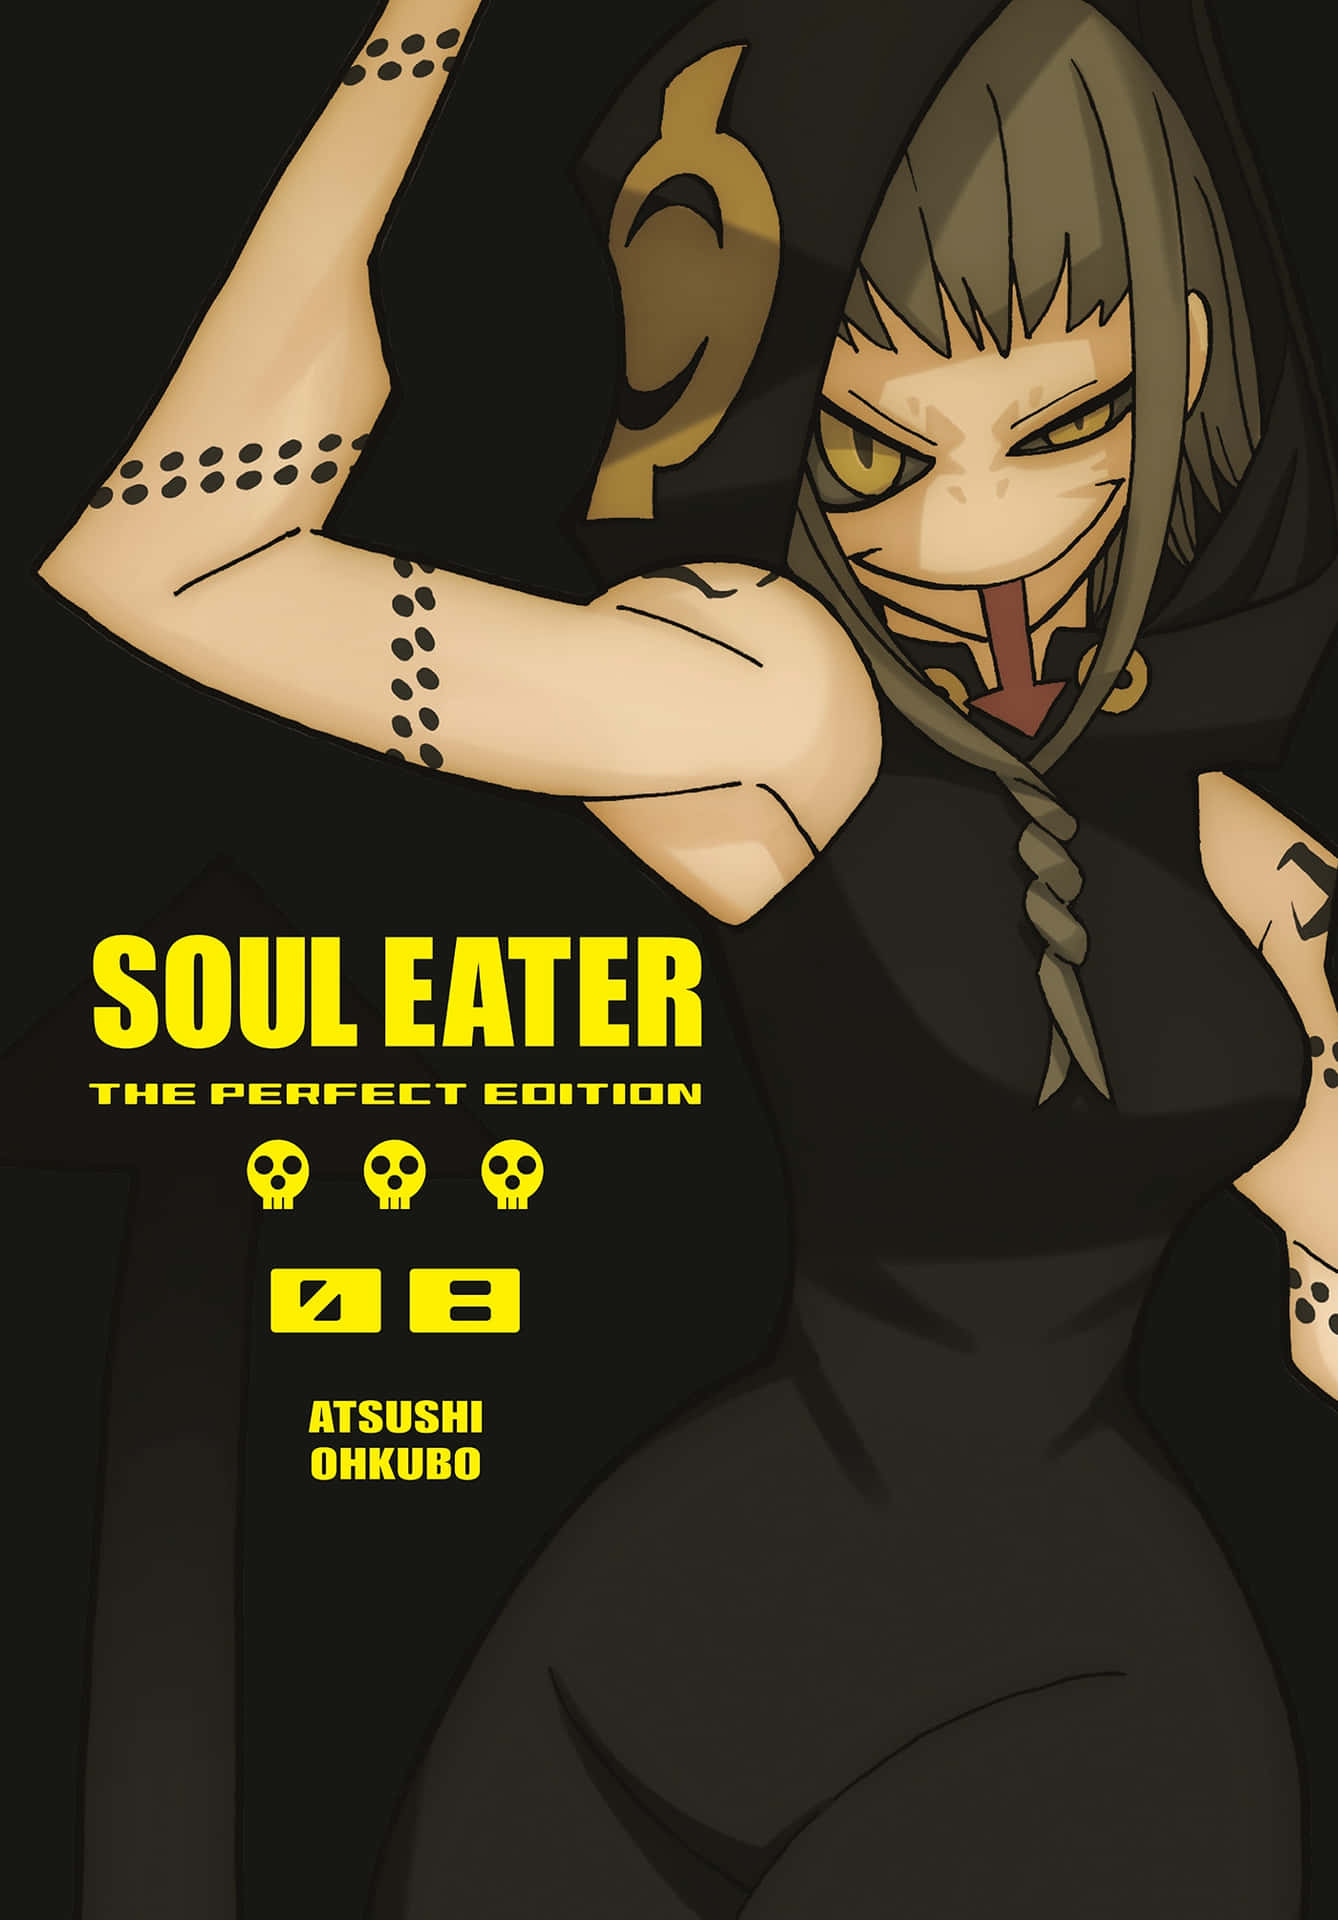 Inspired by the Soul Eater Manga Series